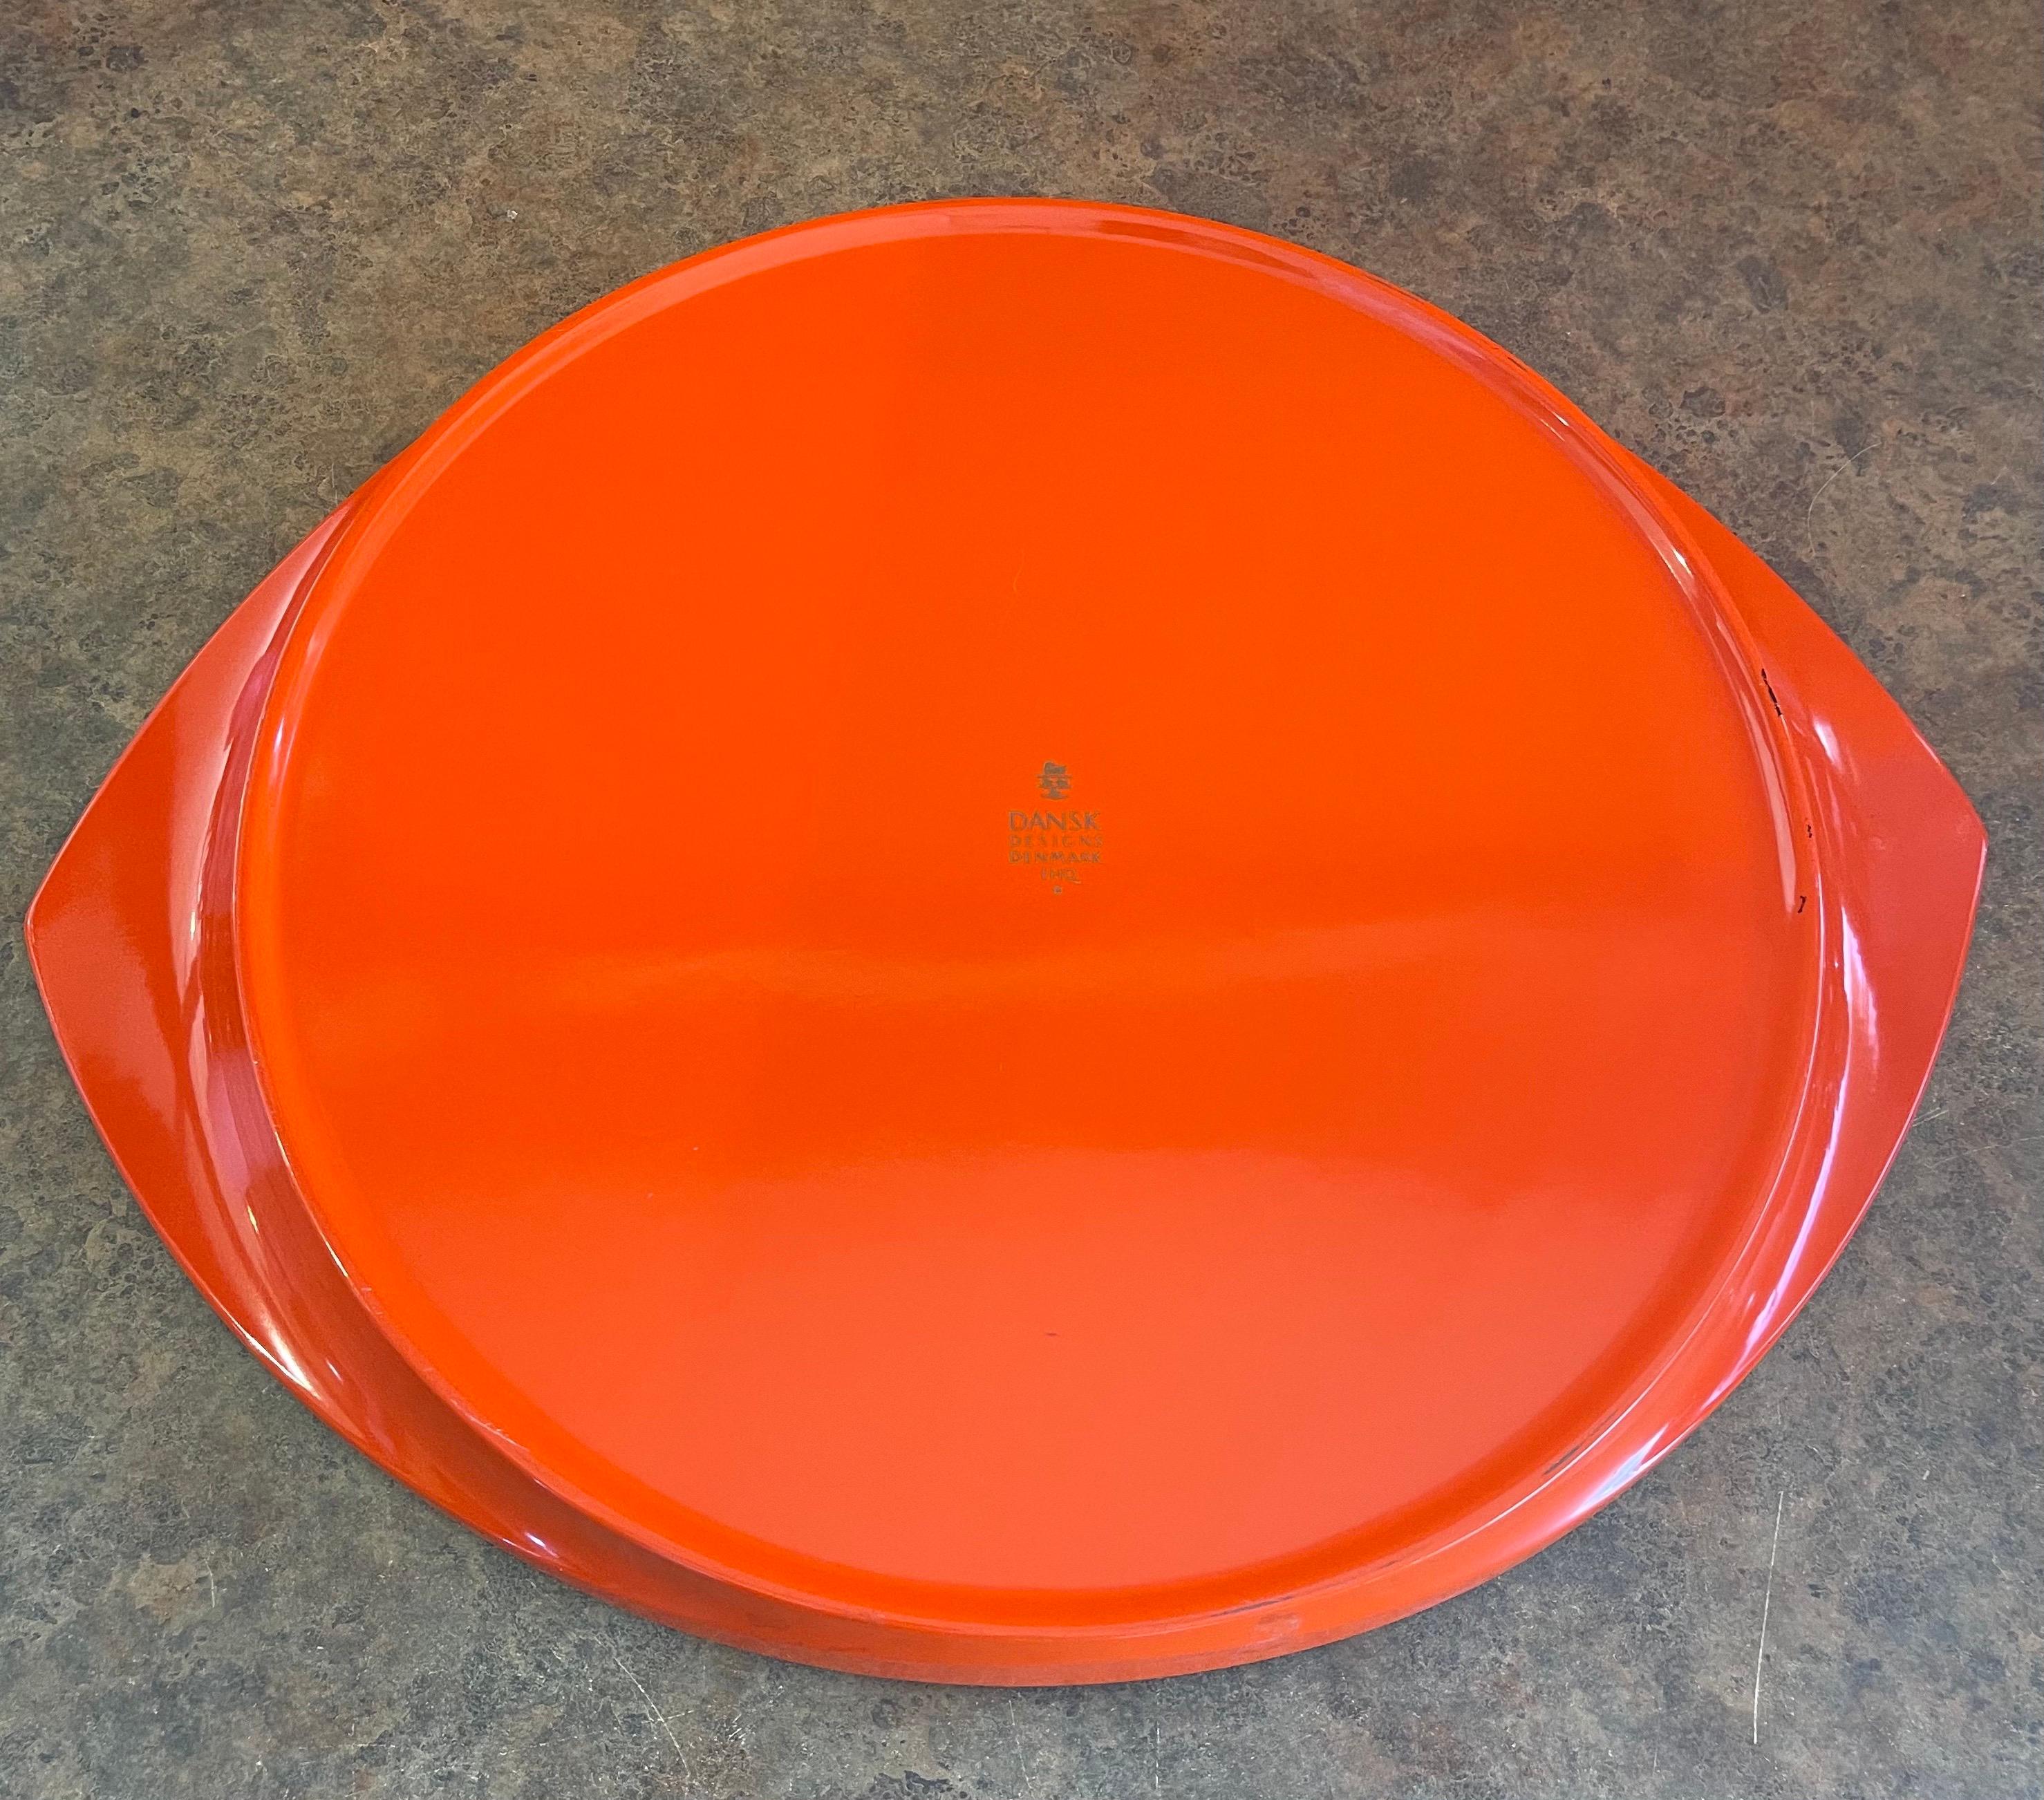 Maple Large Oval Orange Lacquer Tray by Jens Quistgaard for Dansk, Early Production